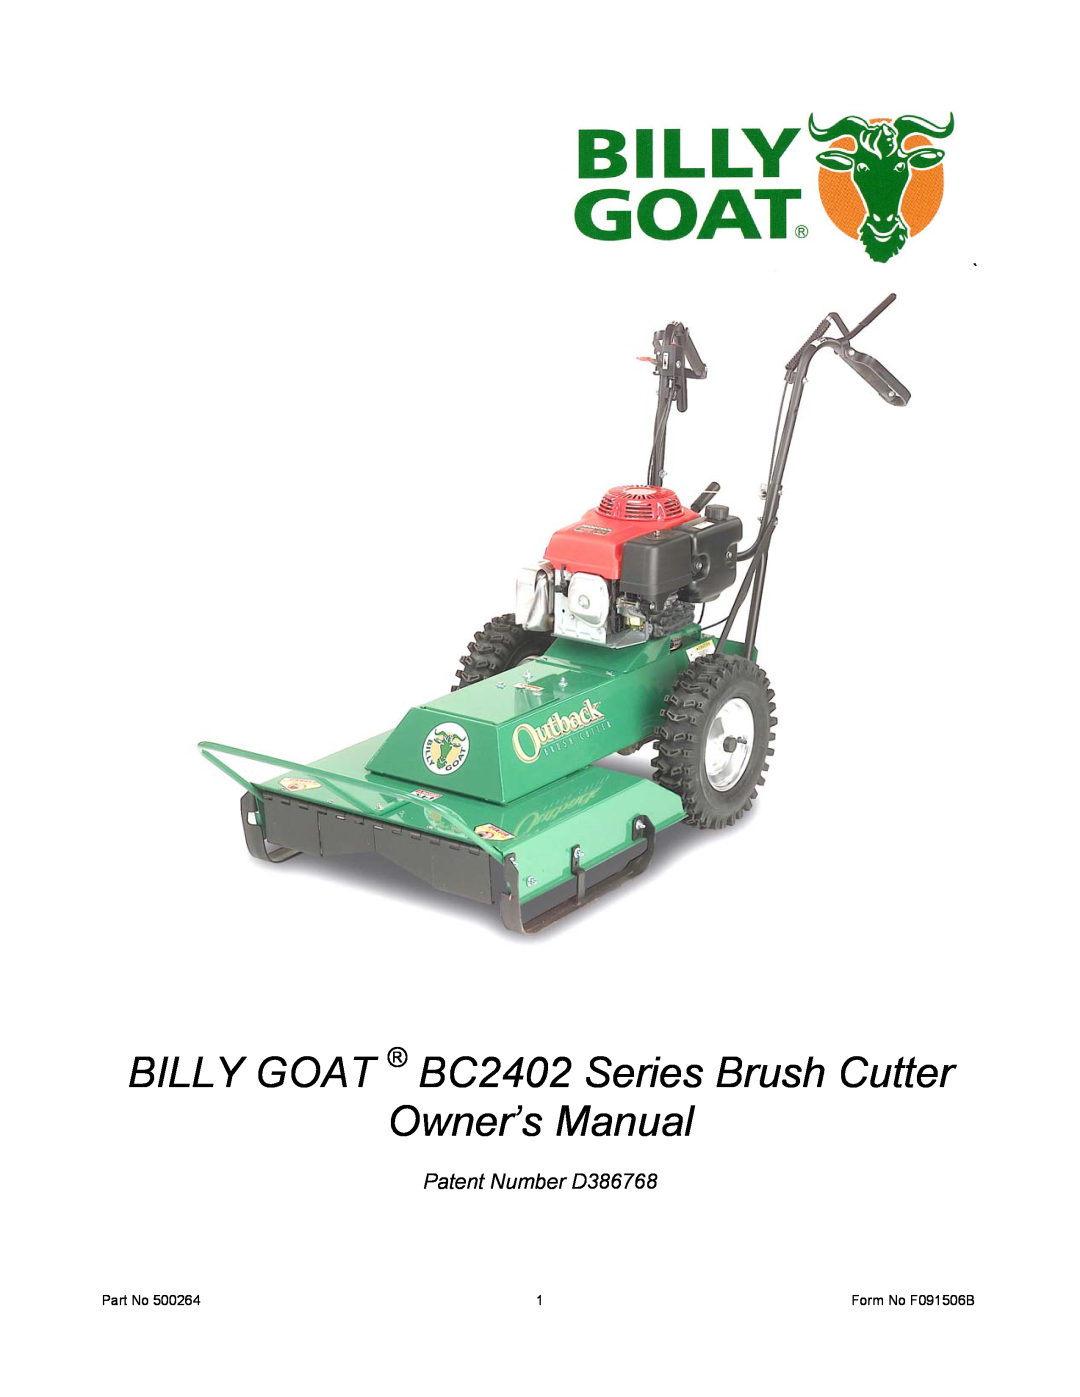 Billy Goat BC2402 owner manual Patent Number D386768 